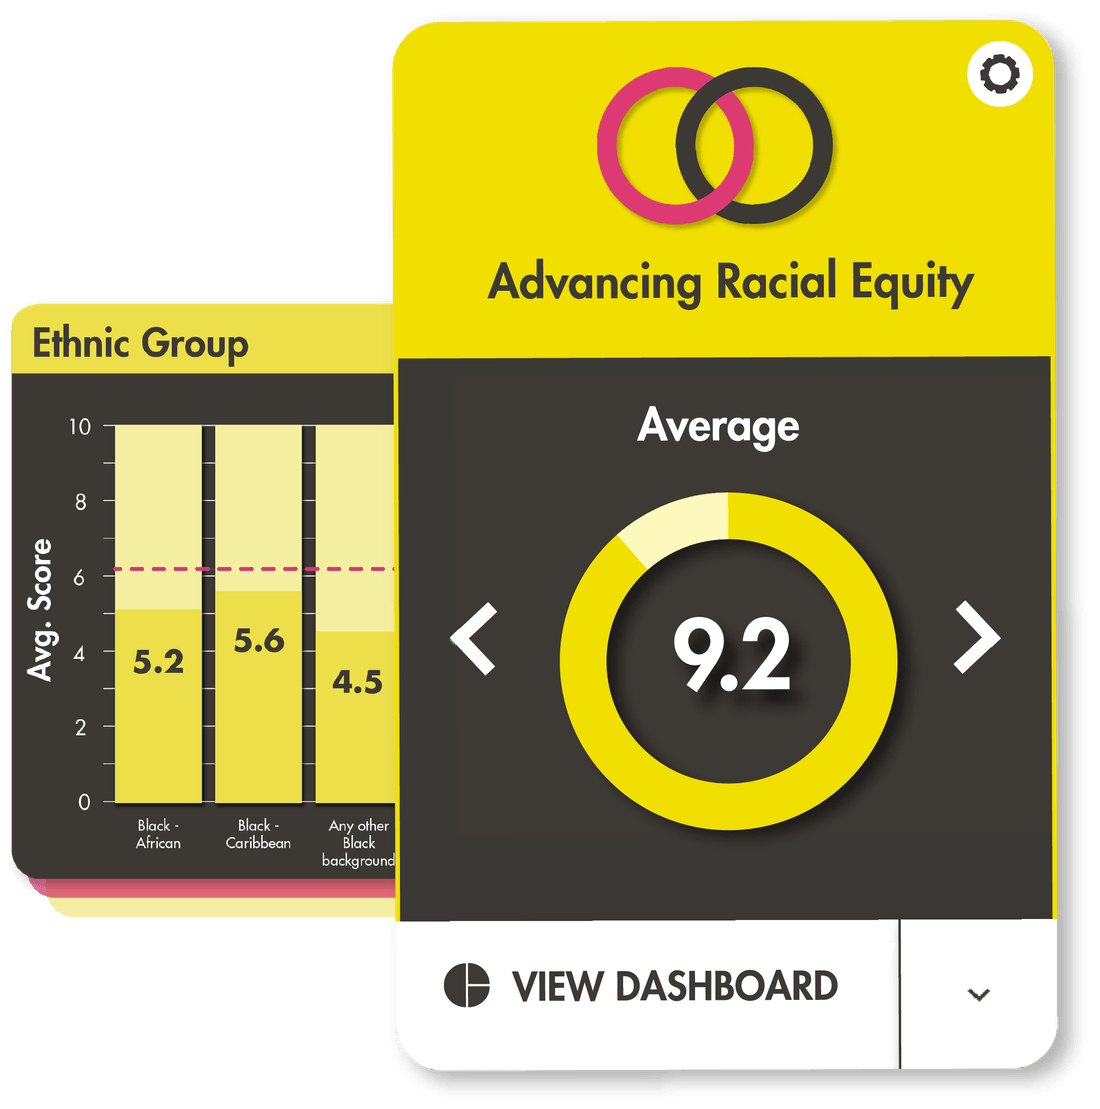 Platform image showing ethnic group and racial equity results